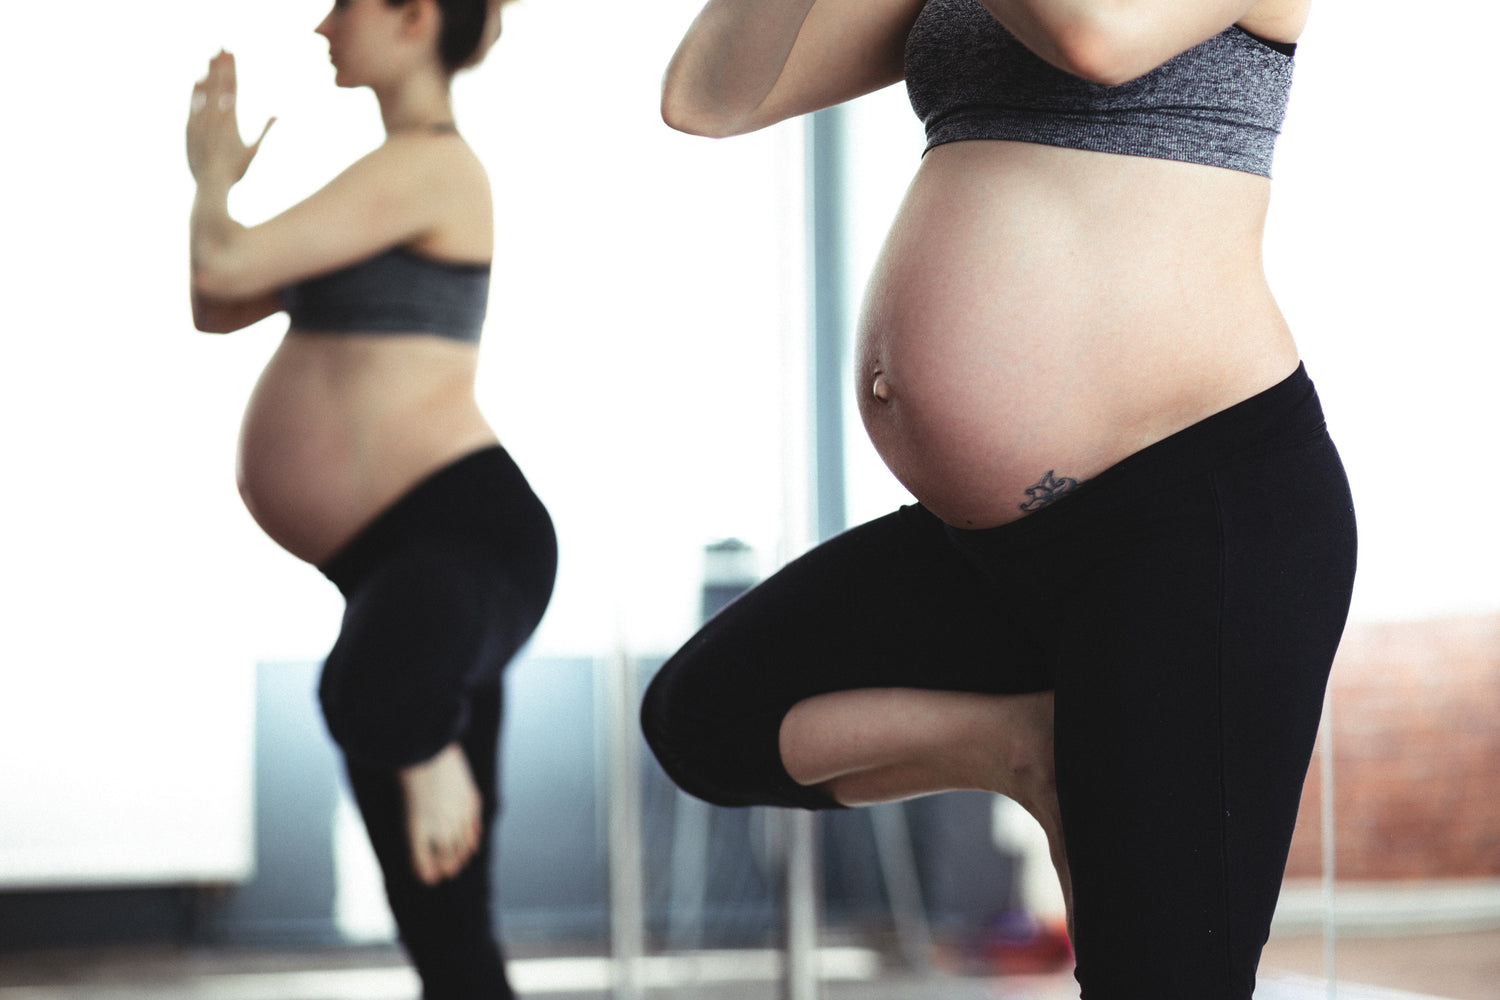 10 Easy Prenatal Yoga Stretches + Breathing Exercises You Can Do at Home